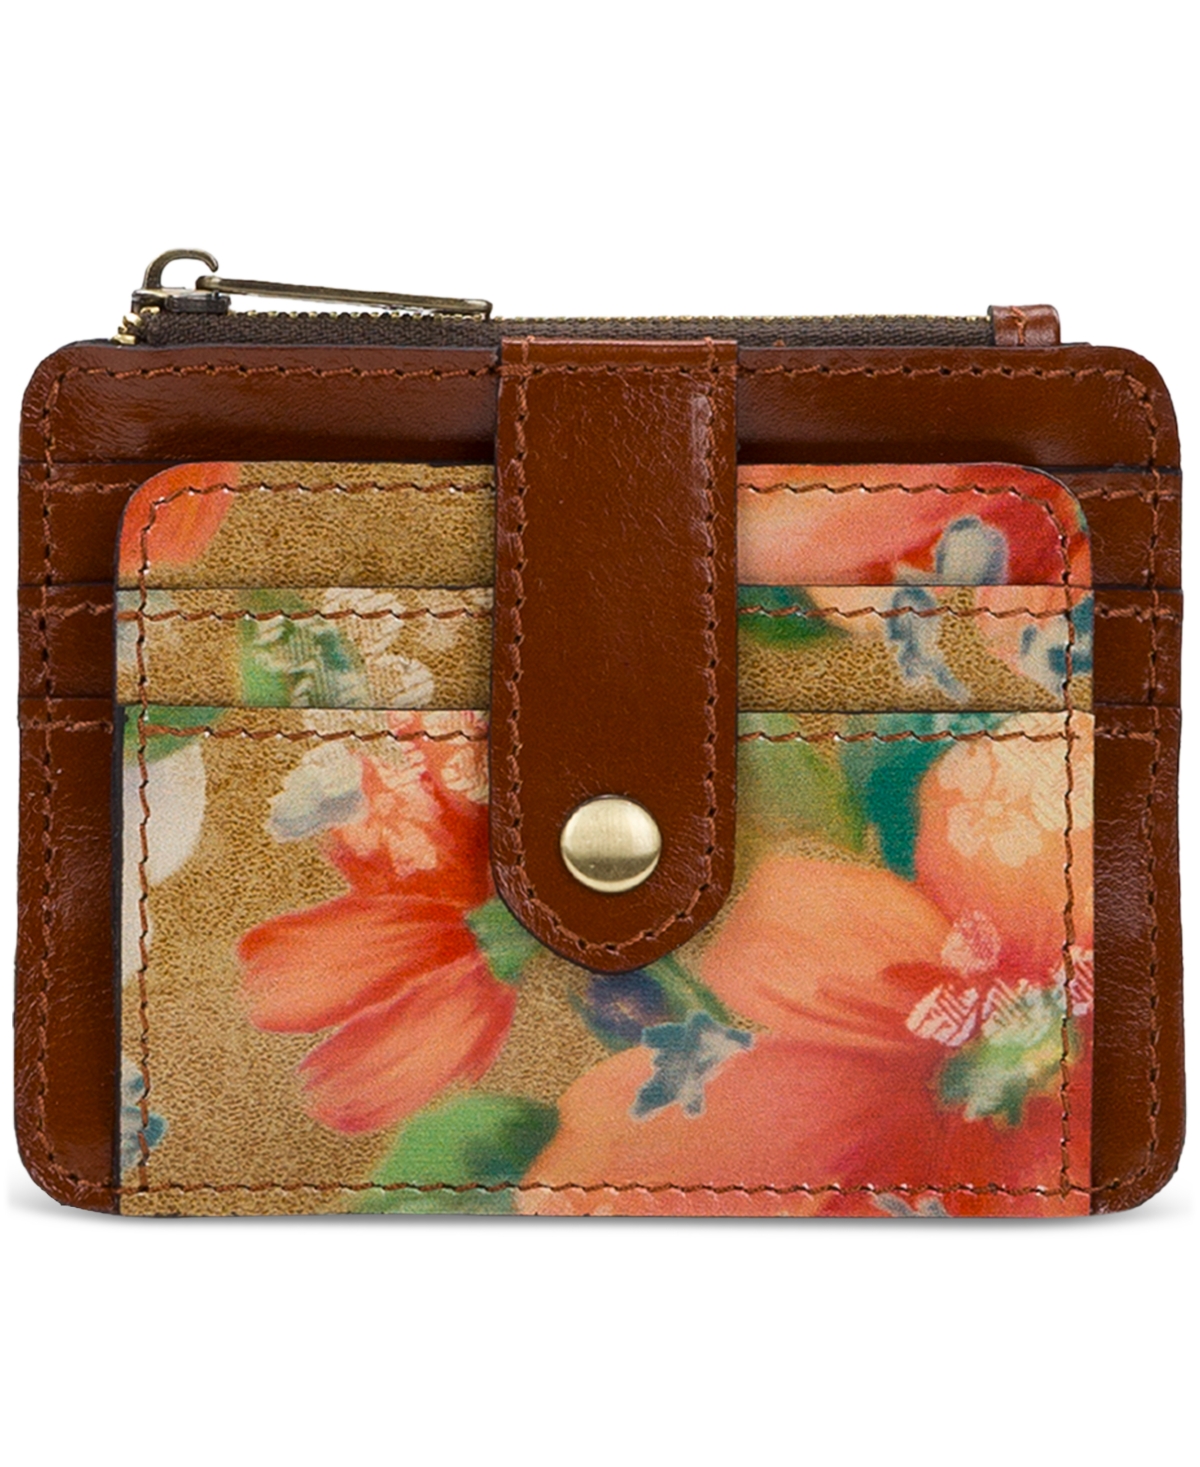 Cassis Id Small Printed Leather Wallet - Seashells